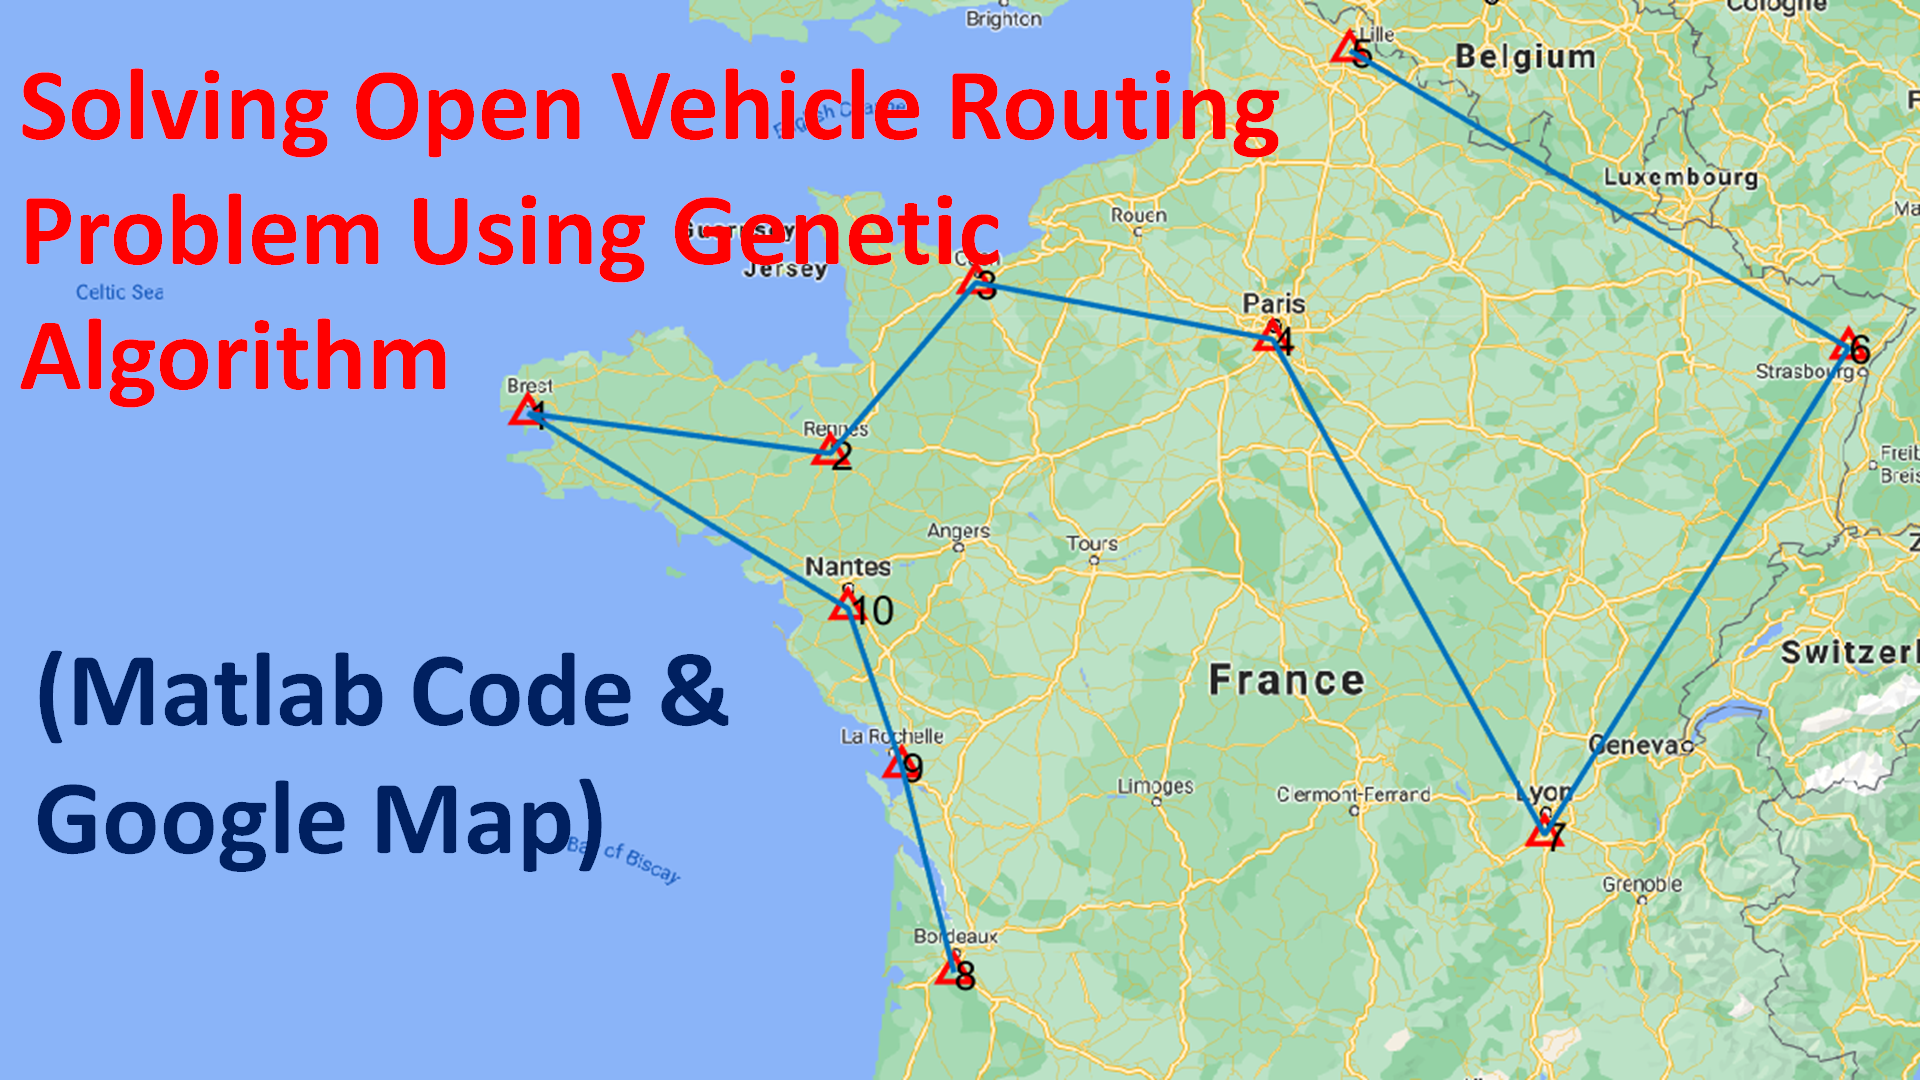 How to Solve Open Vehicle Routing Problem Using Genetic Algorithm